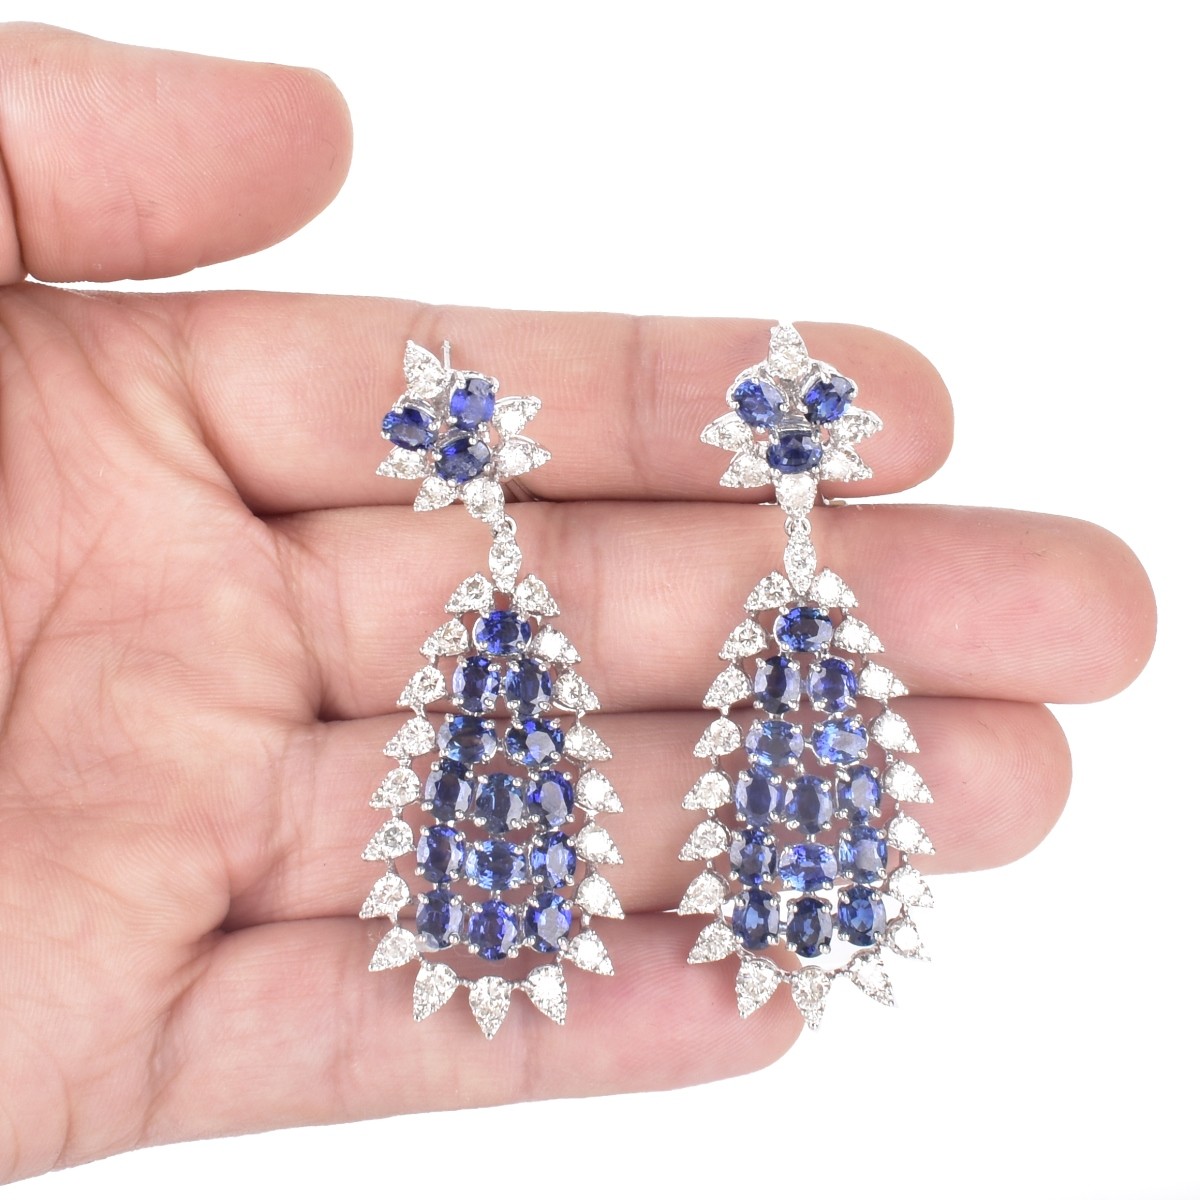 VCA style Sapphire and Diamond Earrings - Image 5 of 5